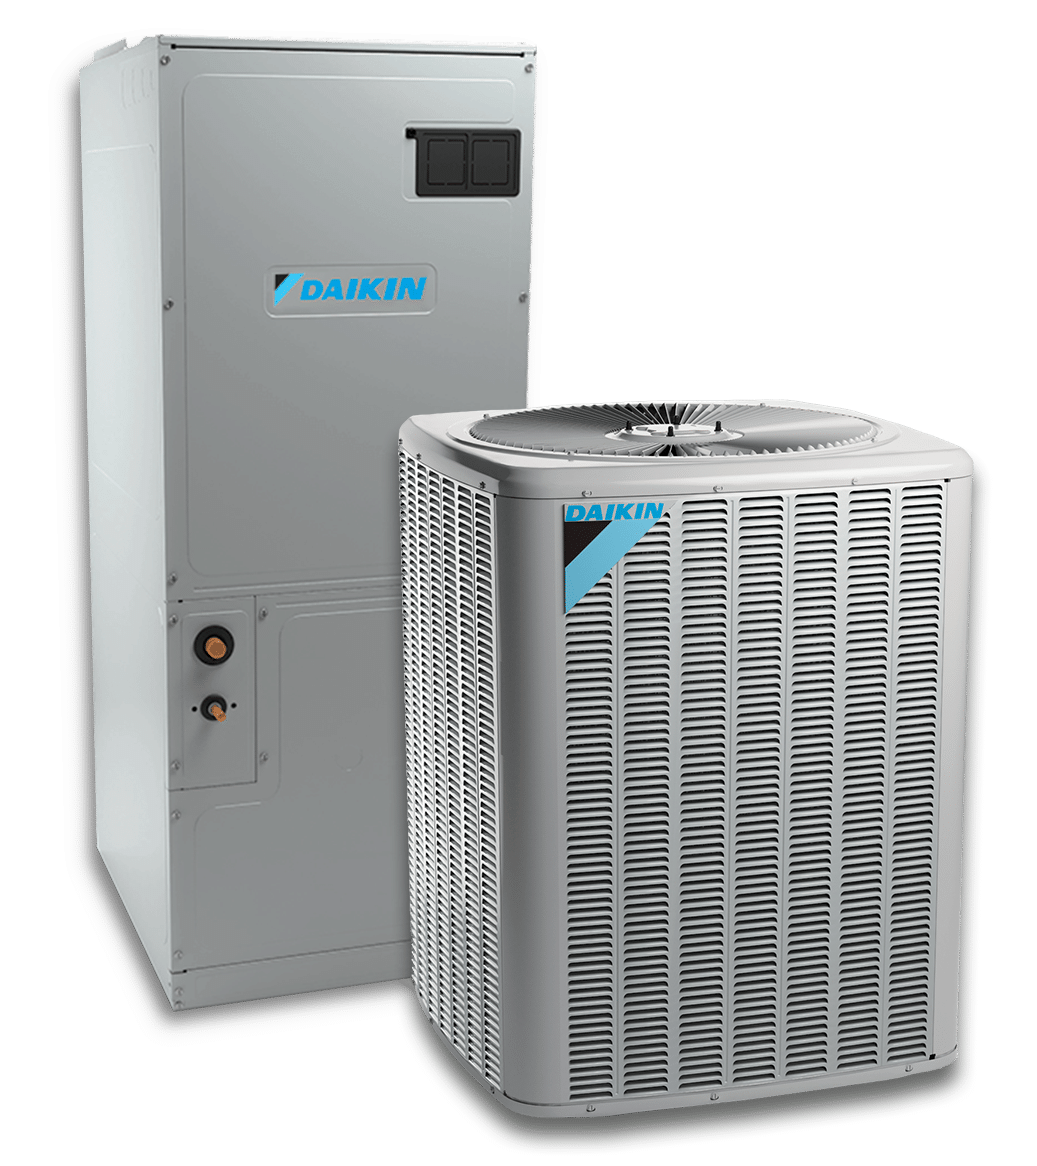 Daikin Home Air Conditioning Systems